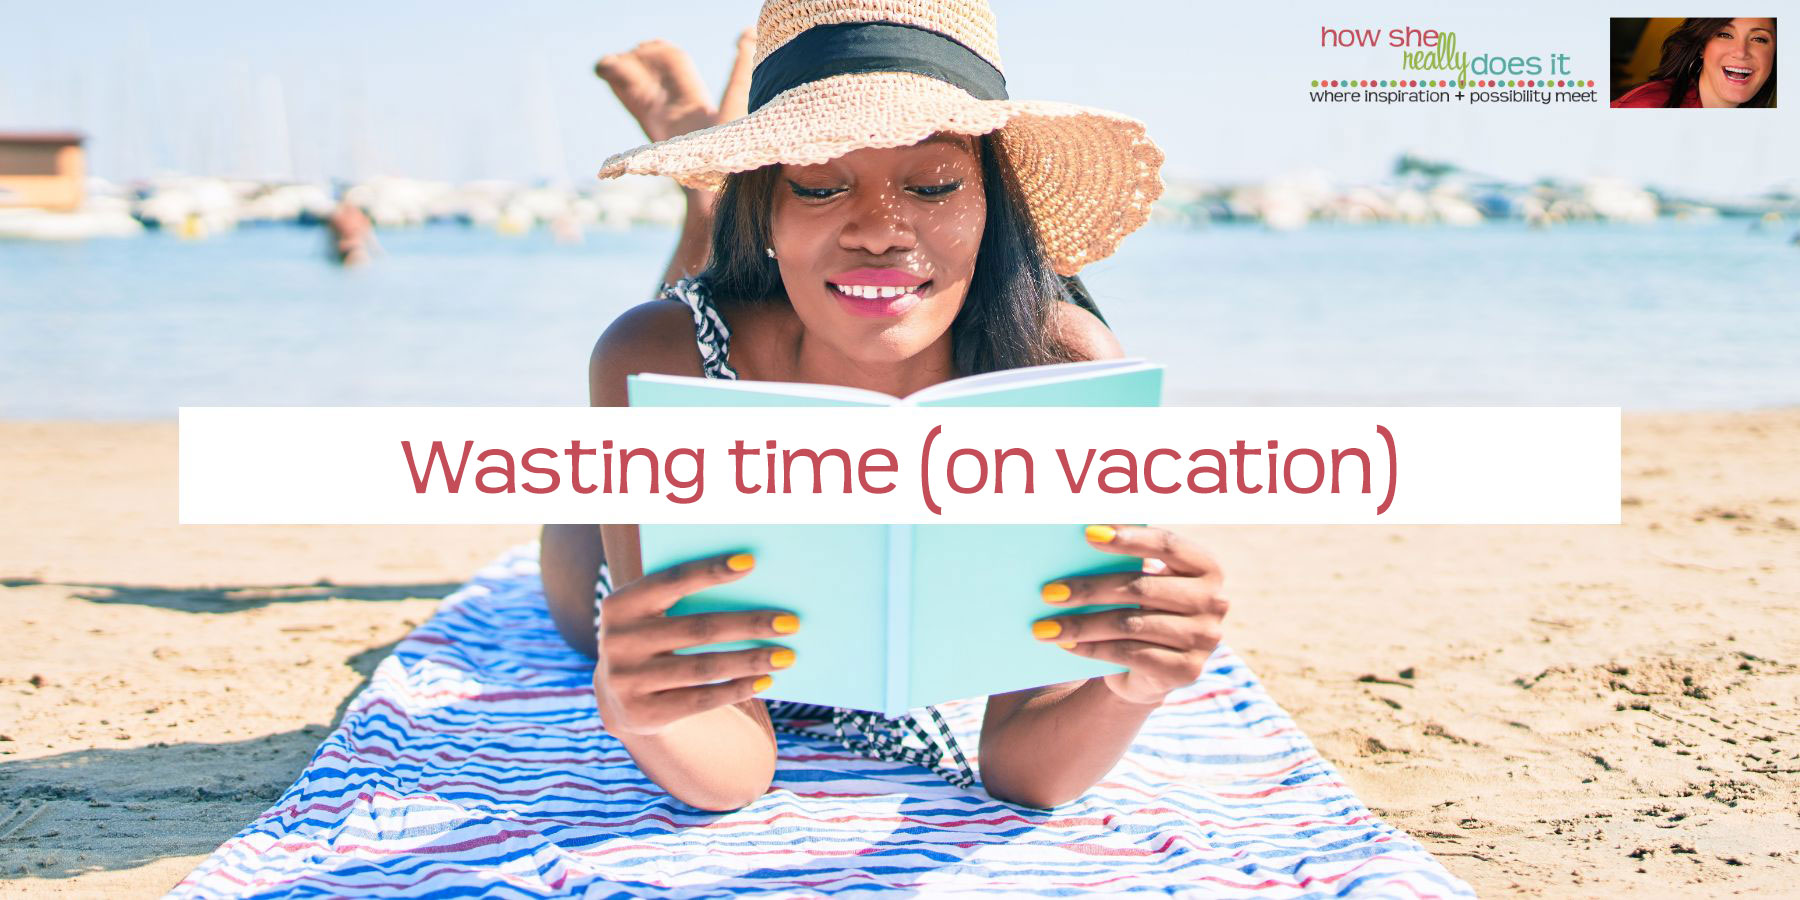 How She Really Does It Koren Motekaitis | Wasting time (on vacation)